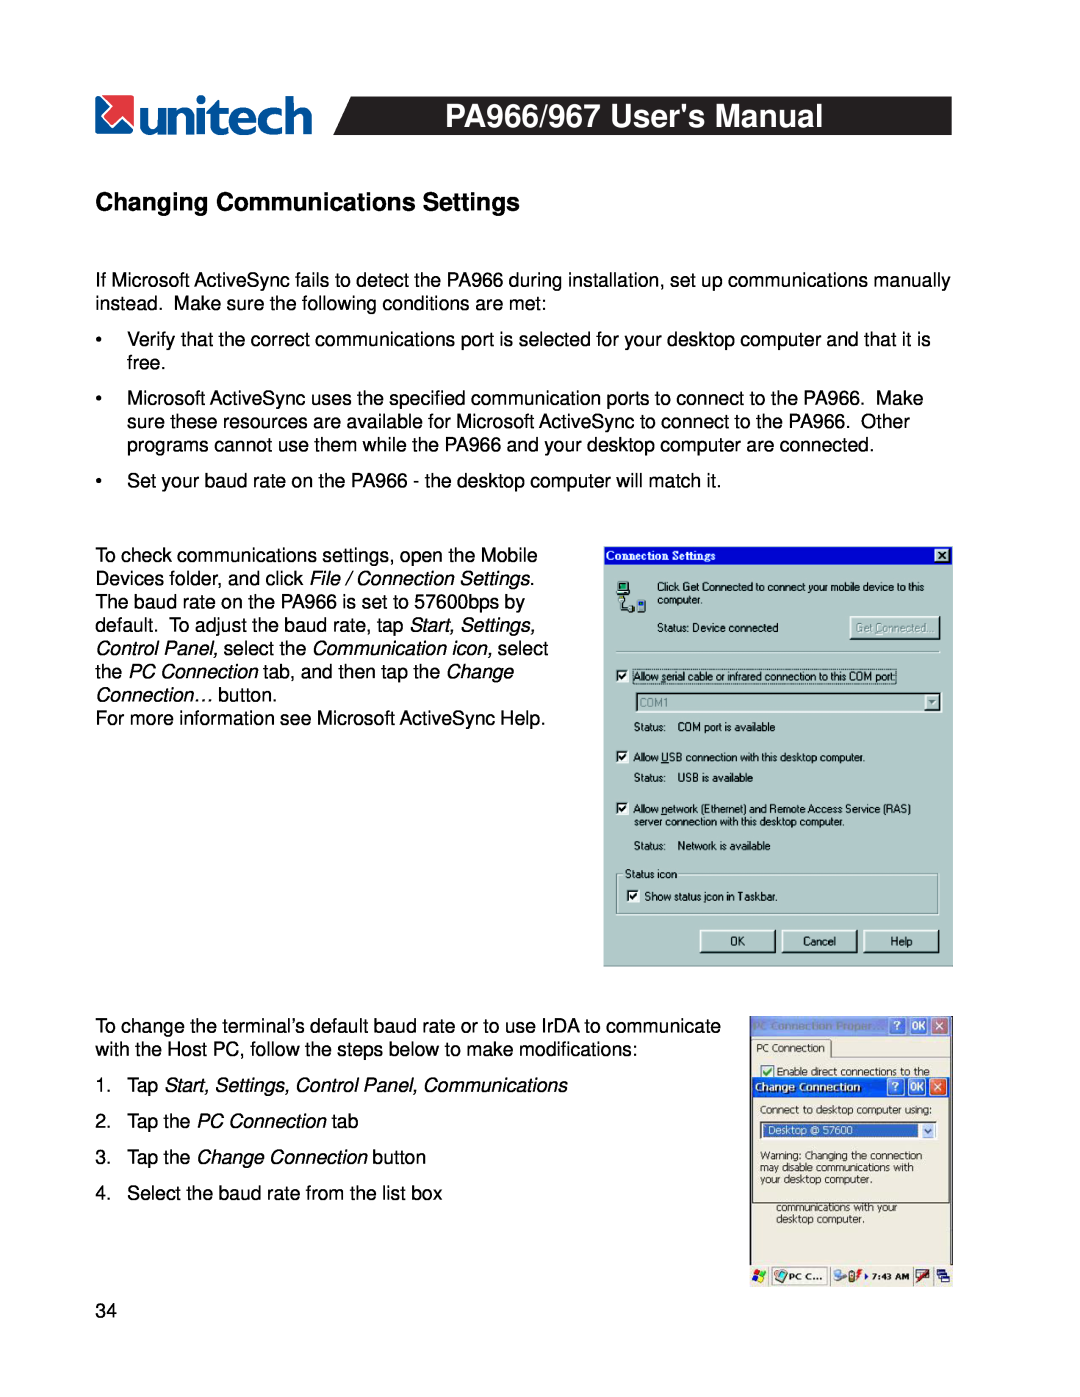 Unitech PA967, PA966 Changing Communications Settings, Tap the PC Connection tab, Tap the Change Connection button 